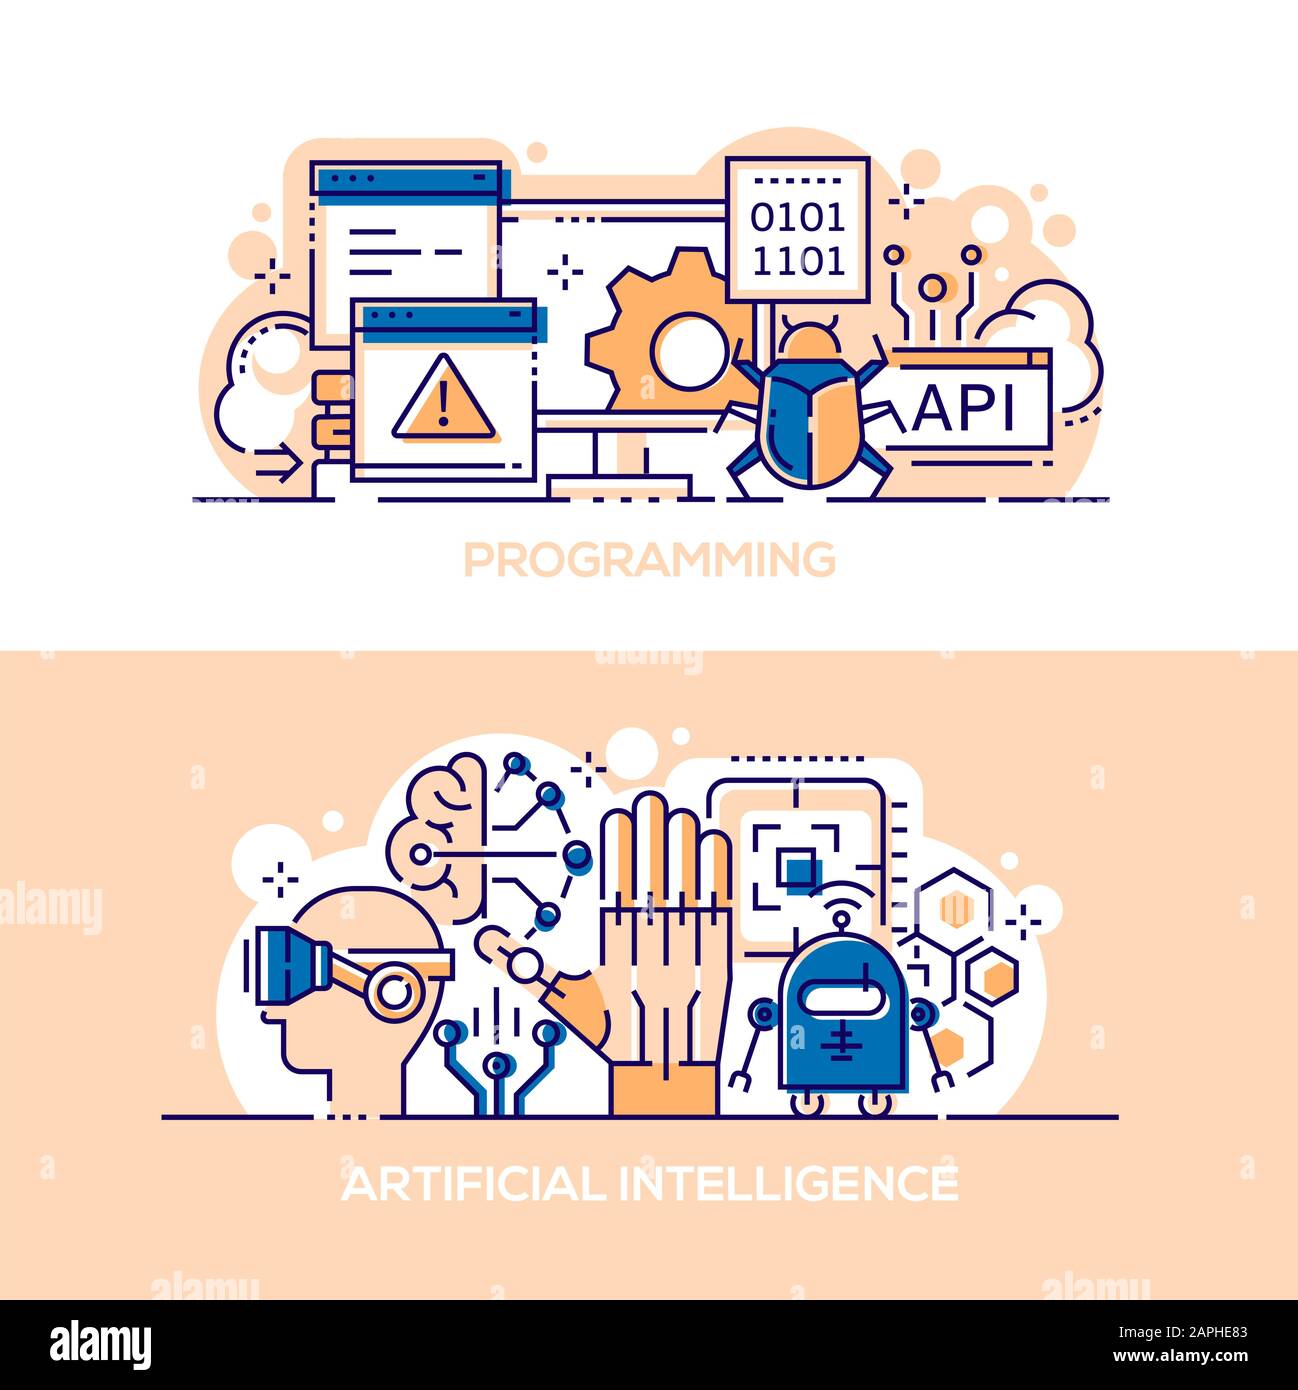 Programming and artificial intelligence banner templates set Stock Vector